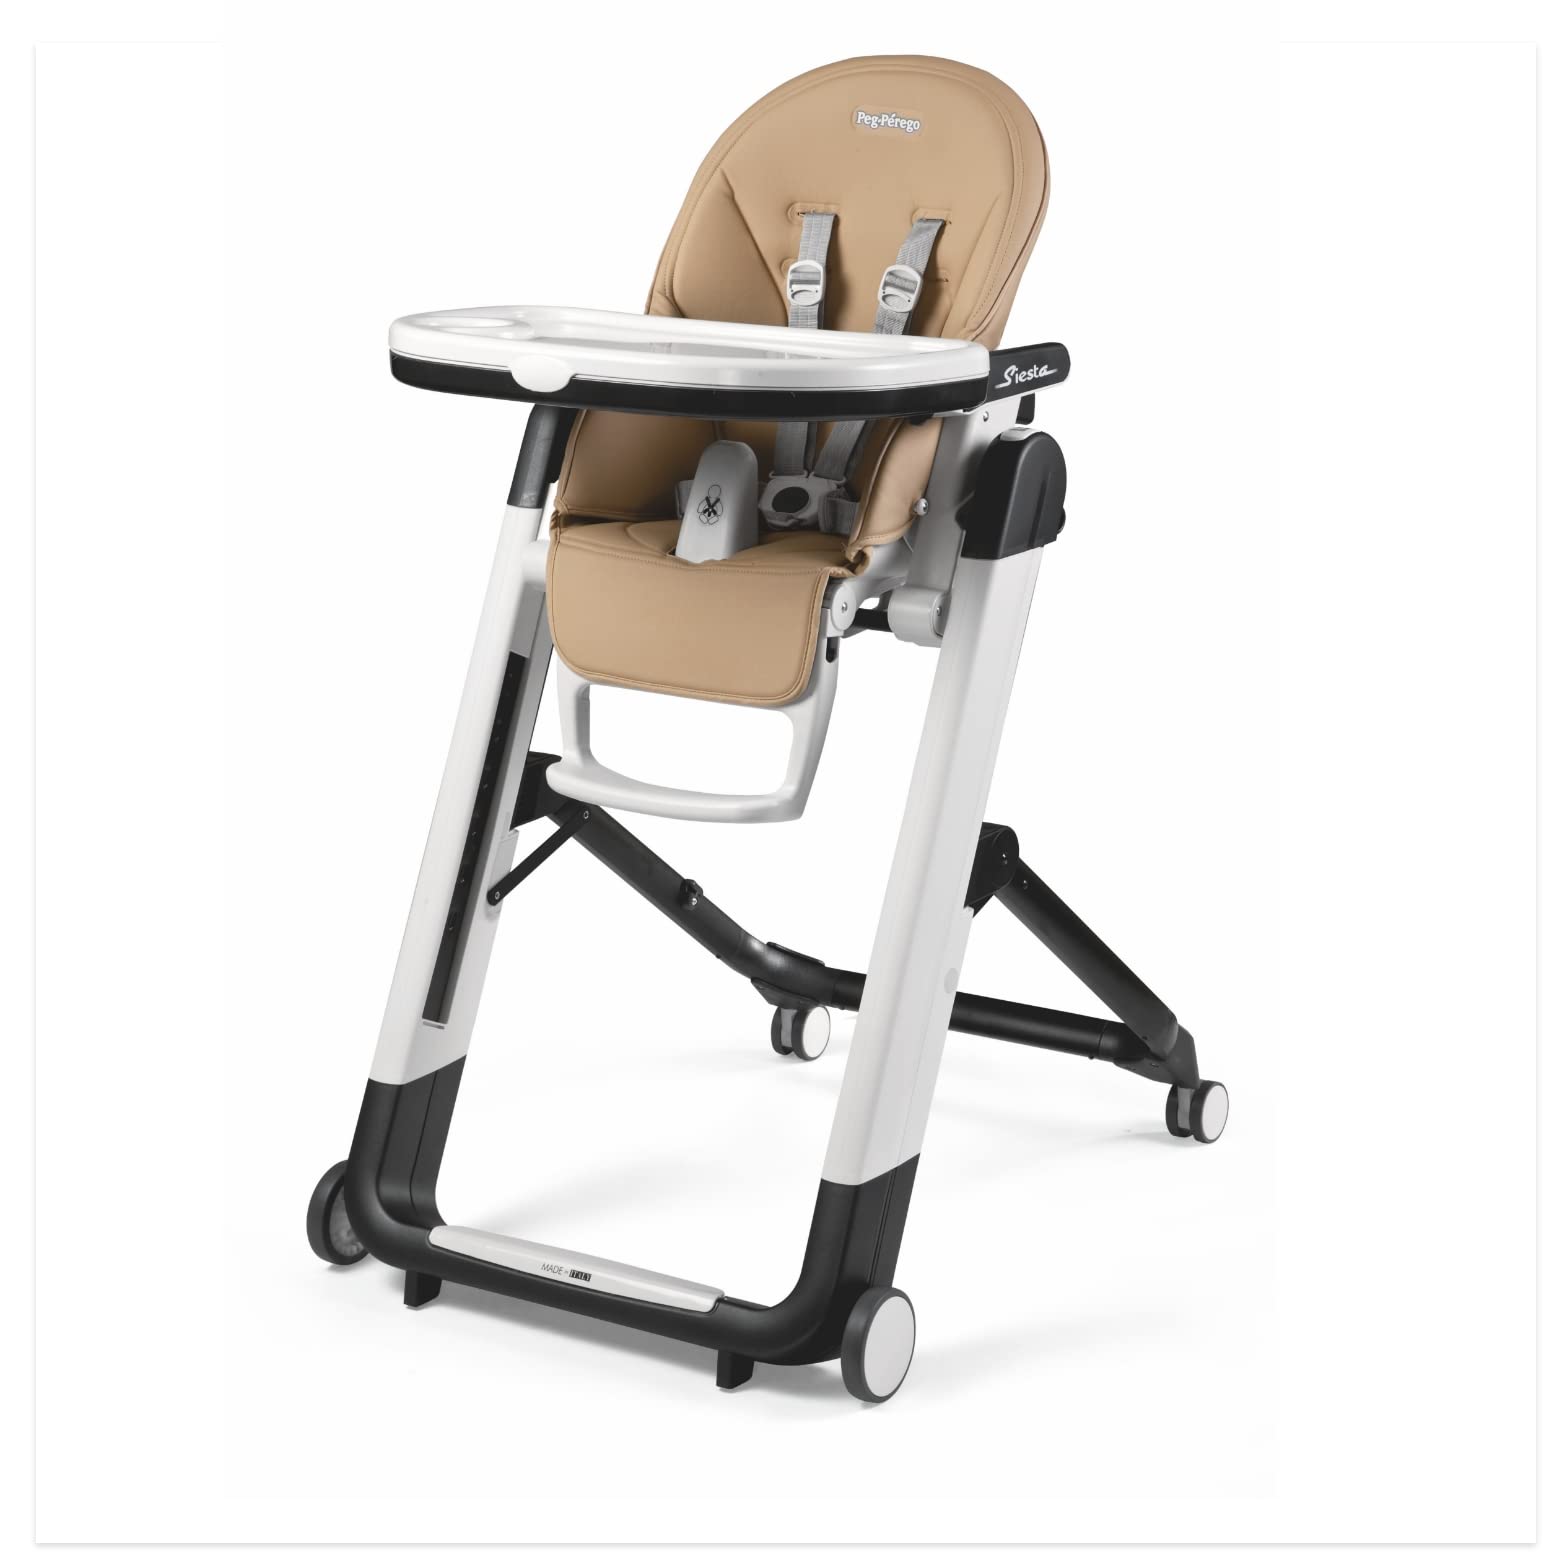 Peg Perego Siesta – Multifunctional Compact Folding High Chair – From Birth to Toddler – Recliner and High Chair – Made in Italy – Noce (Beige)